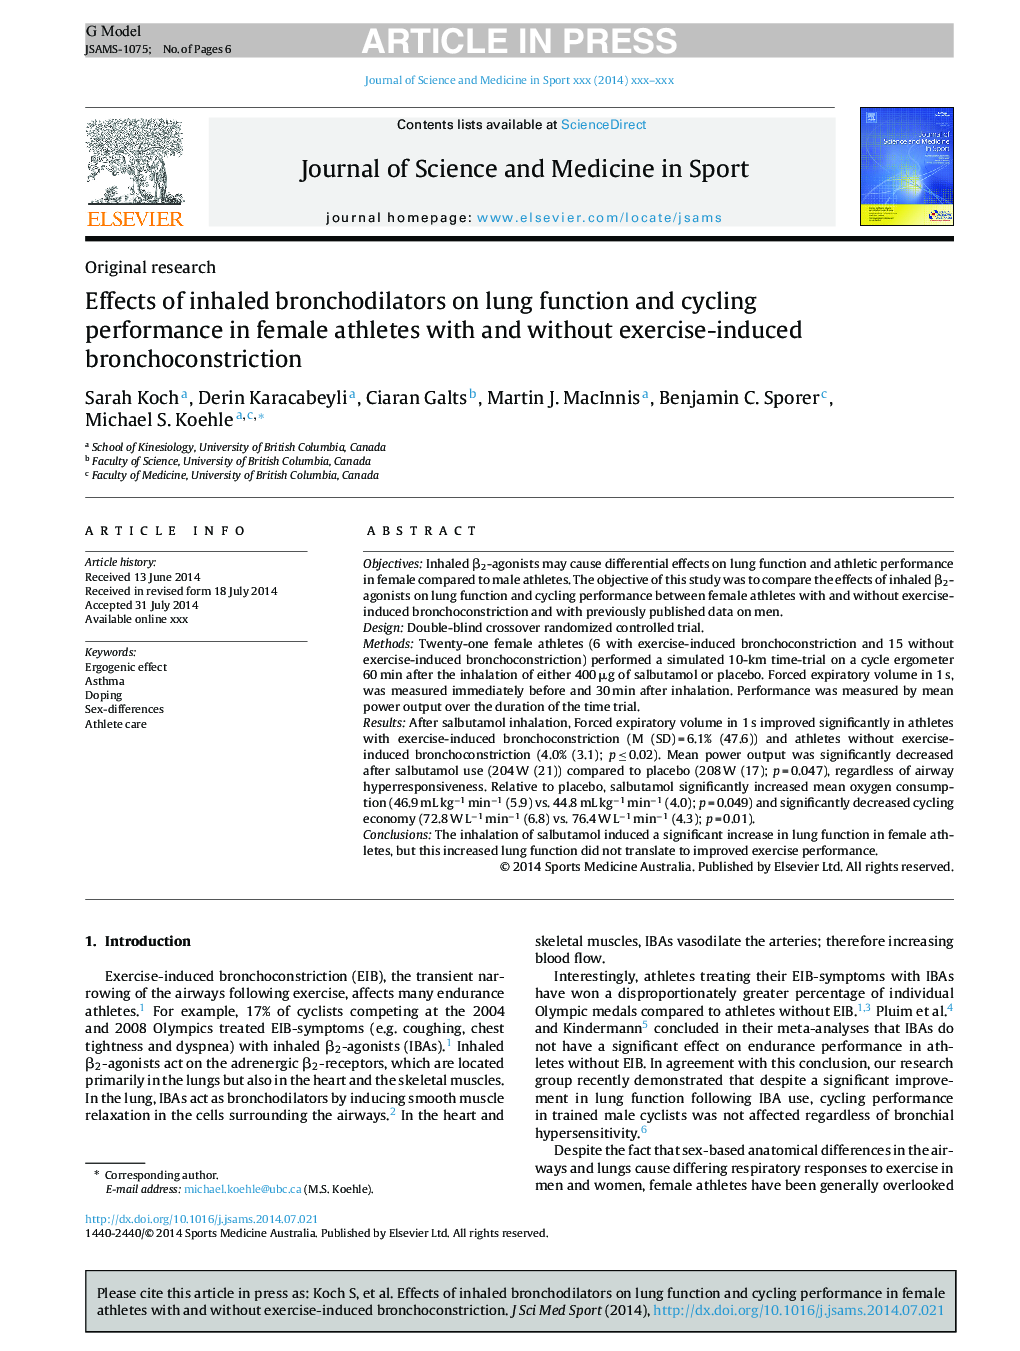 Effects of inhaled bronchodilators on lung function and cycling performance in female athletes with and without exercise-induced bronchoconstriction